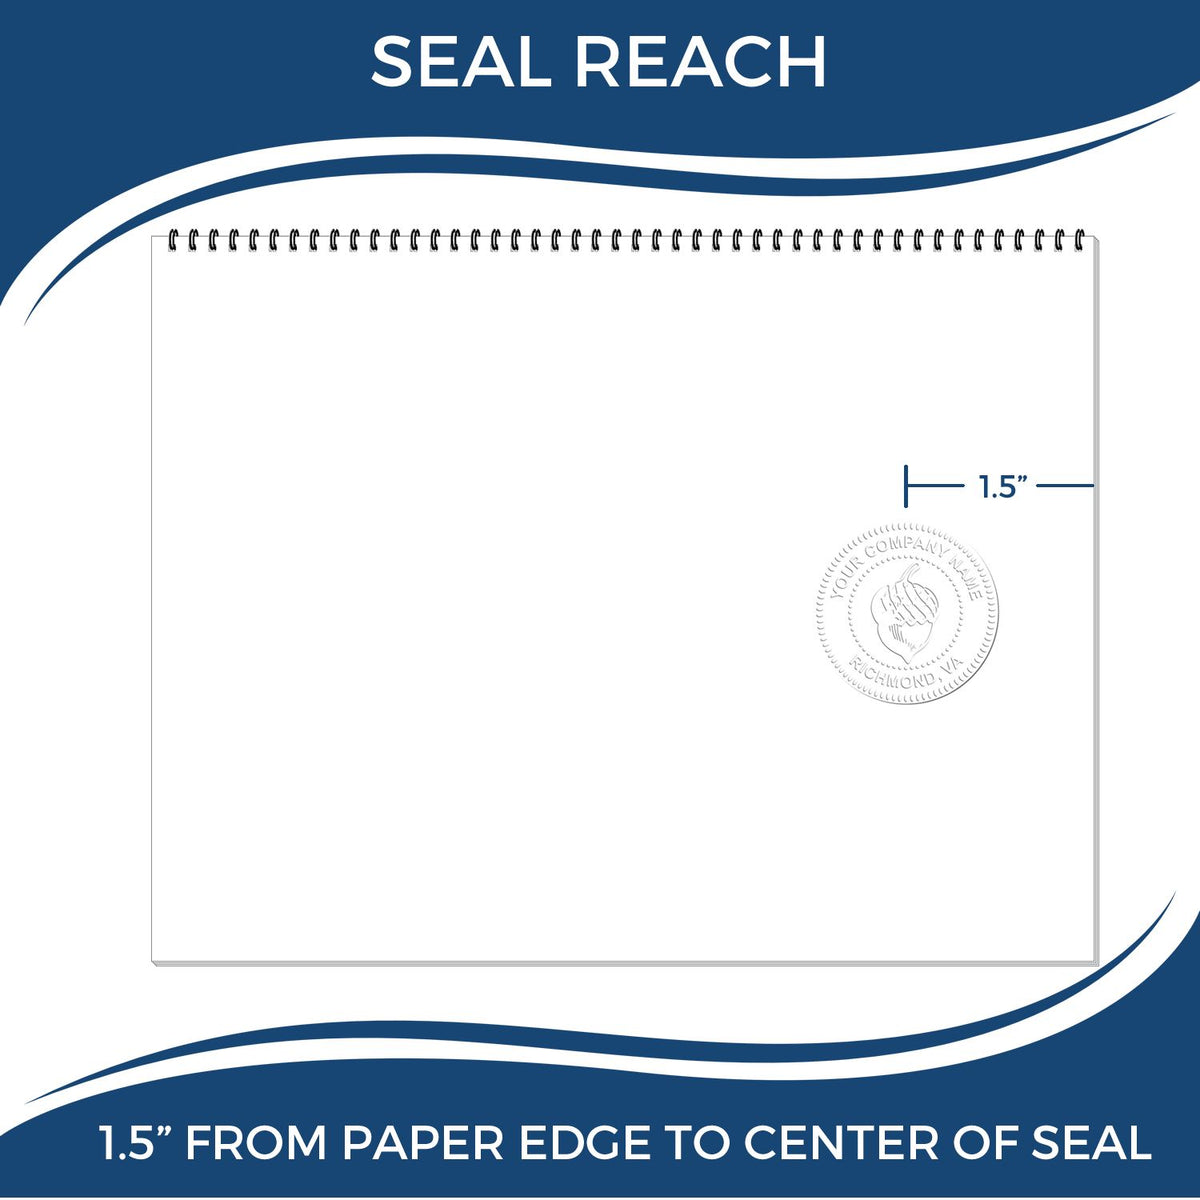 An infographic showing the seal reach which is represented by a ruler and a miniature seal image of the Handheld Vermont Professional Geologist Embosser